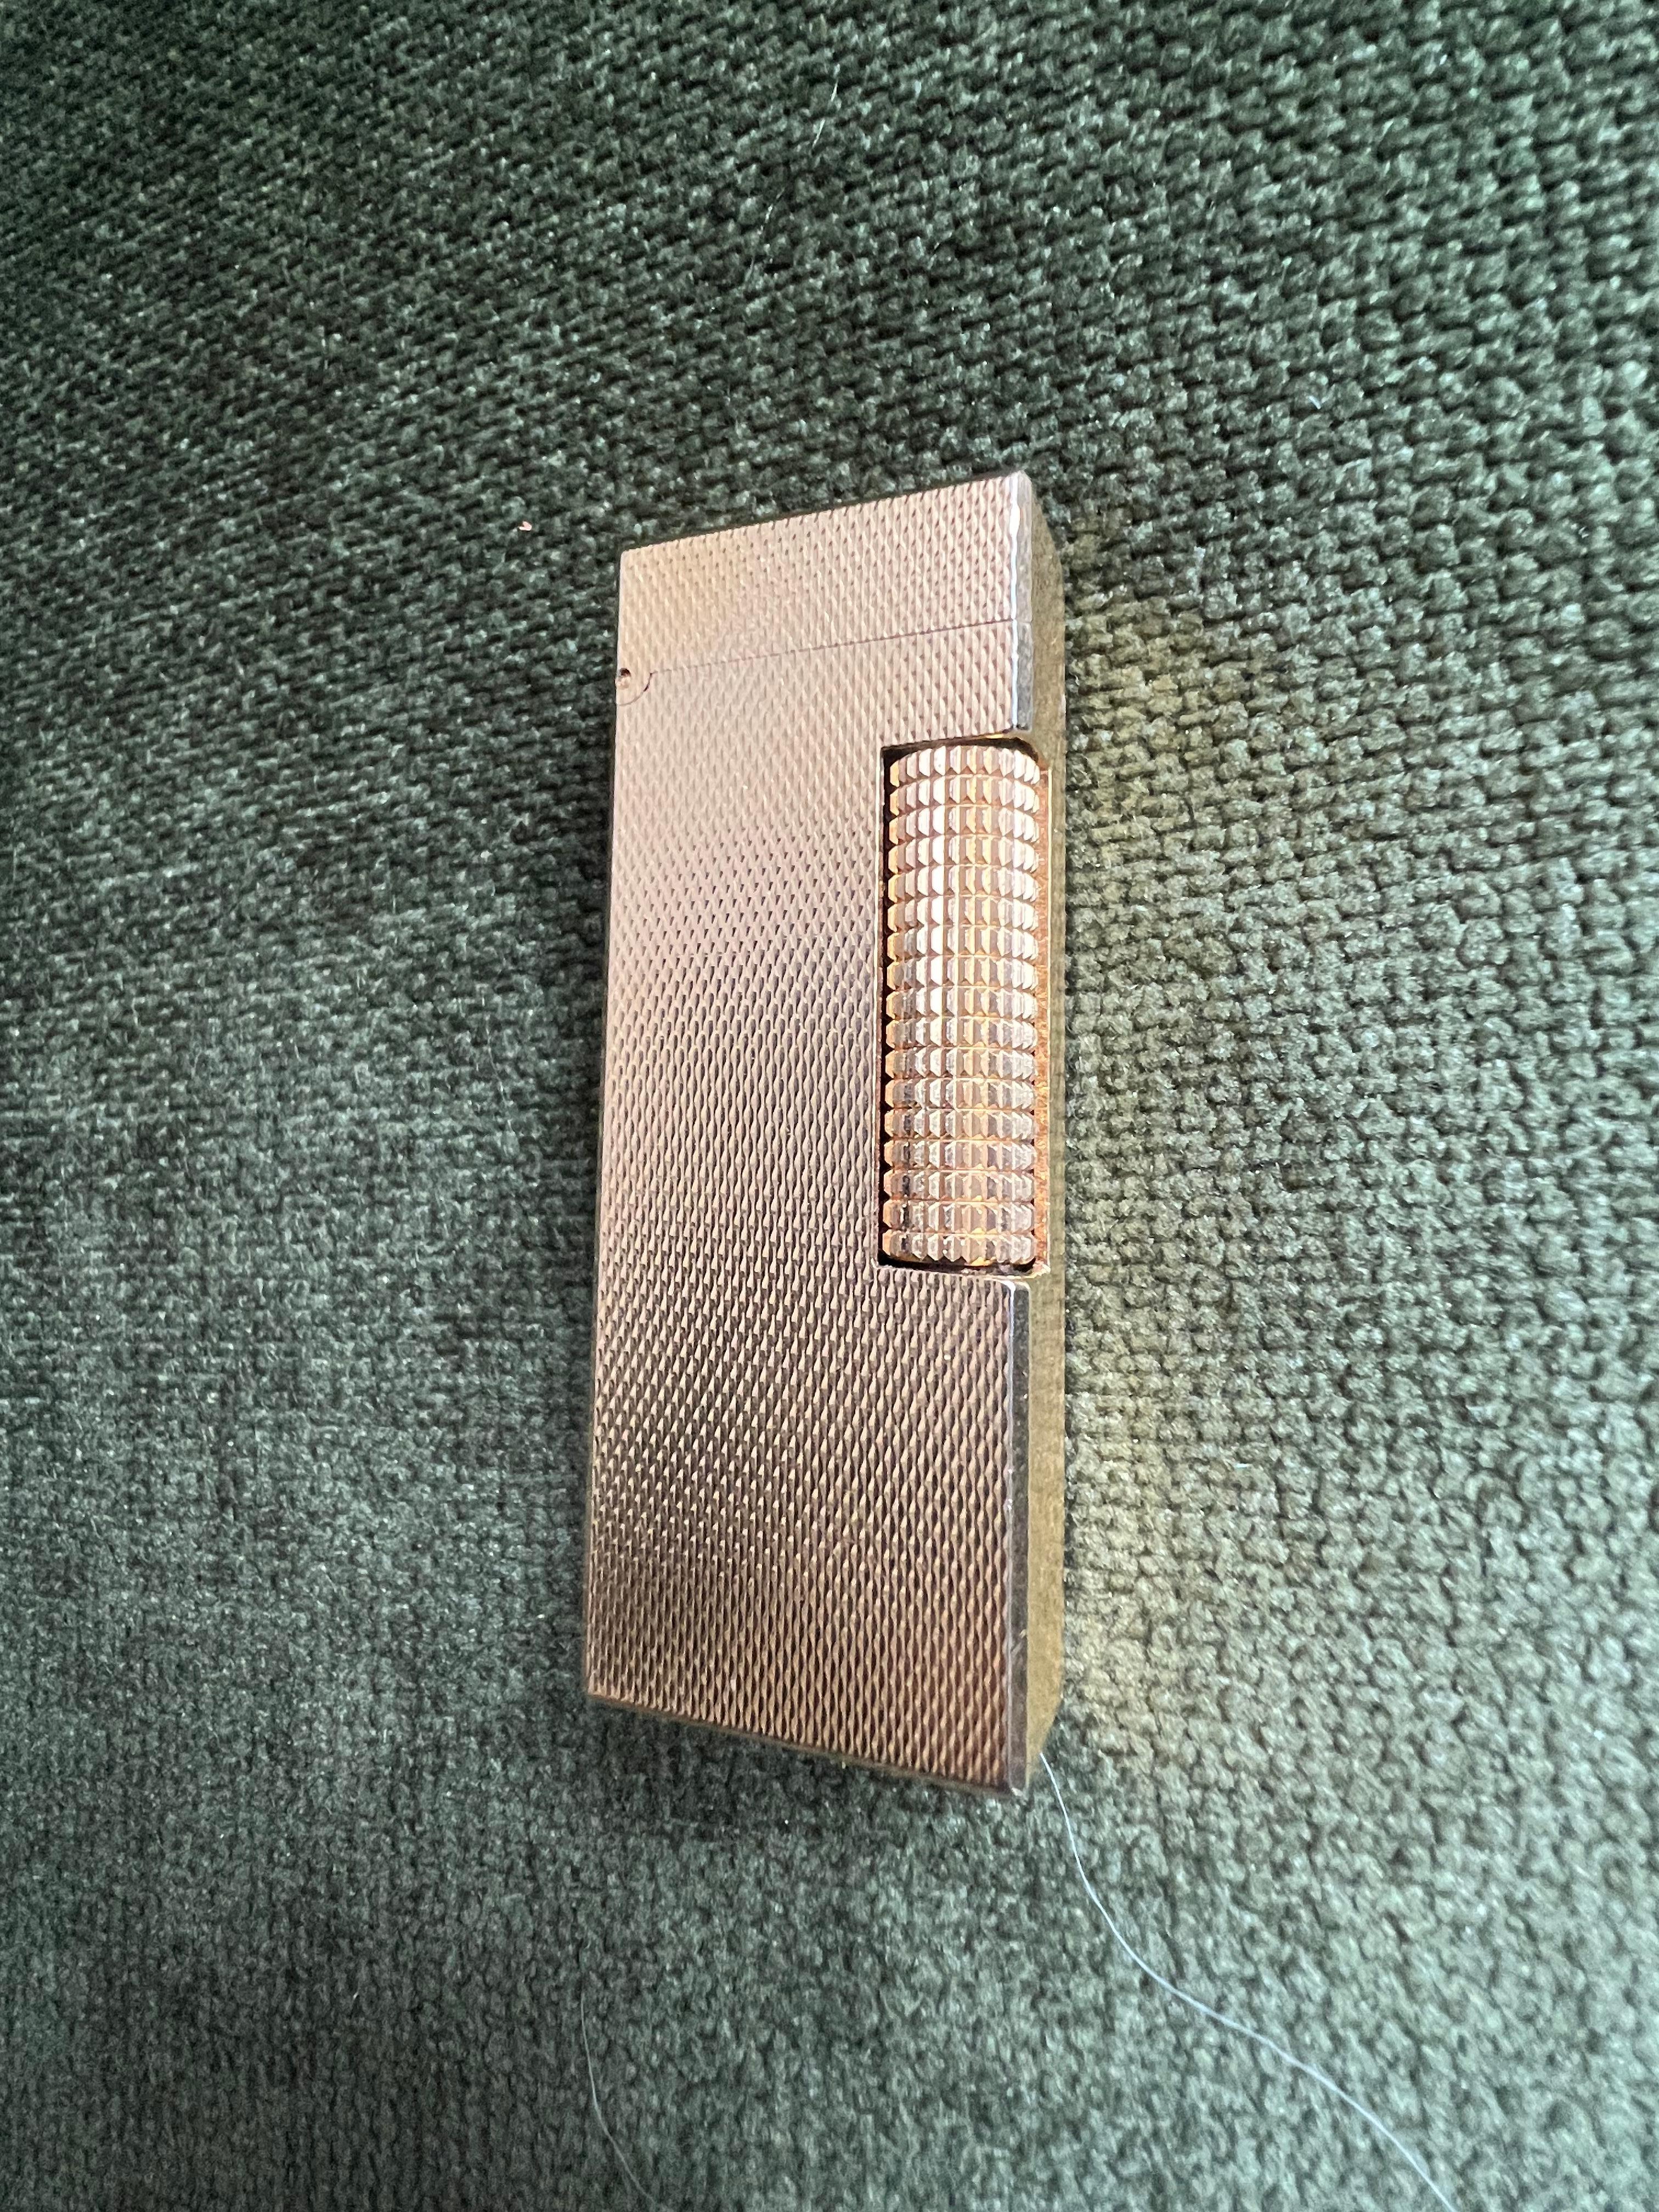 The James Bond Iconic and Rare Vintage Dunhill Gold and Swiss Made Lighter 6